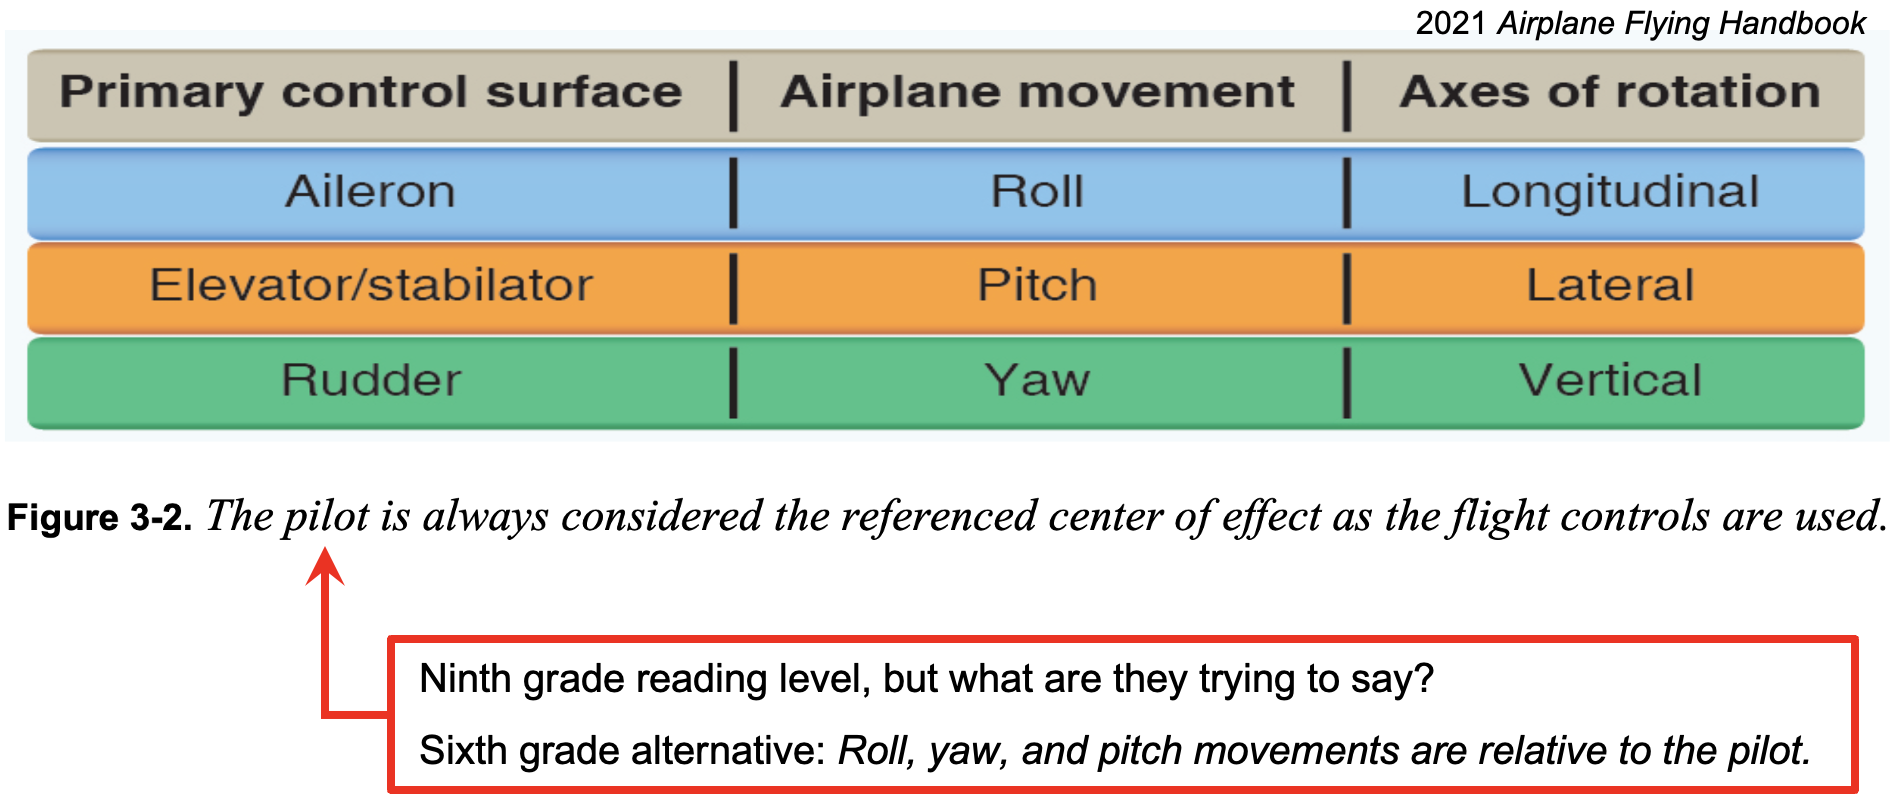 Graphic 3 - Roll Yaw and Pitch Relative to the Pilot